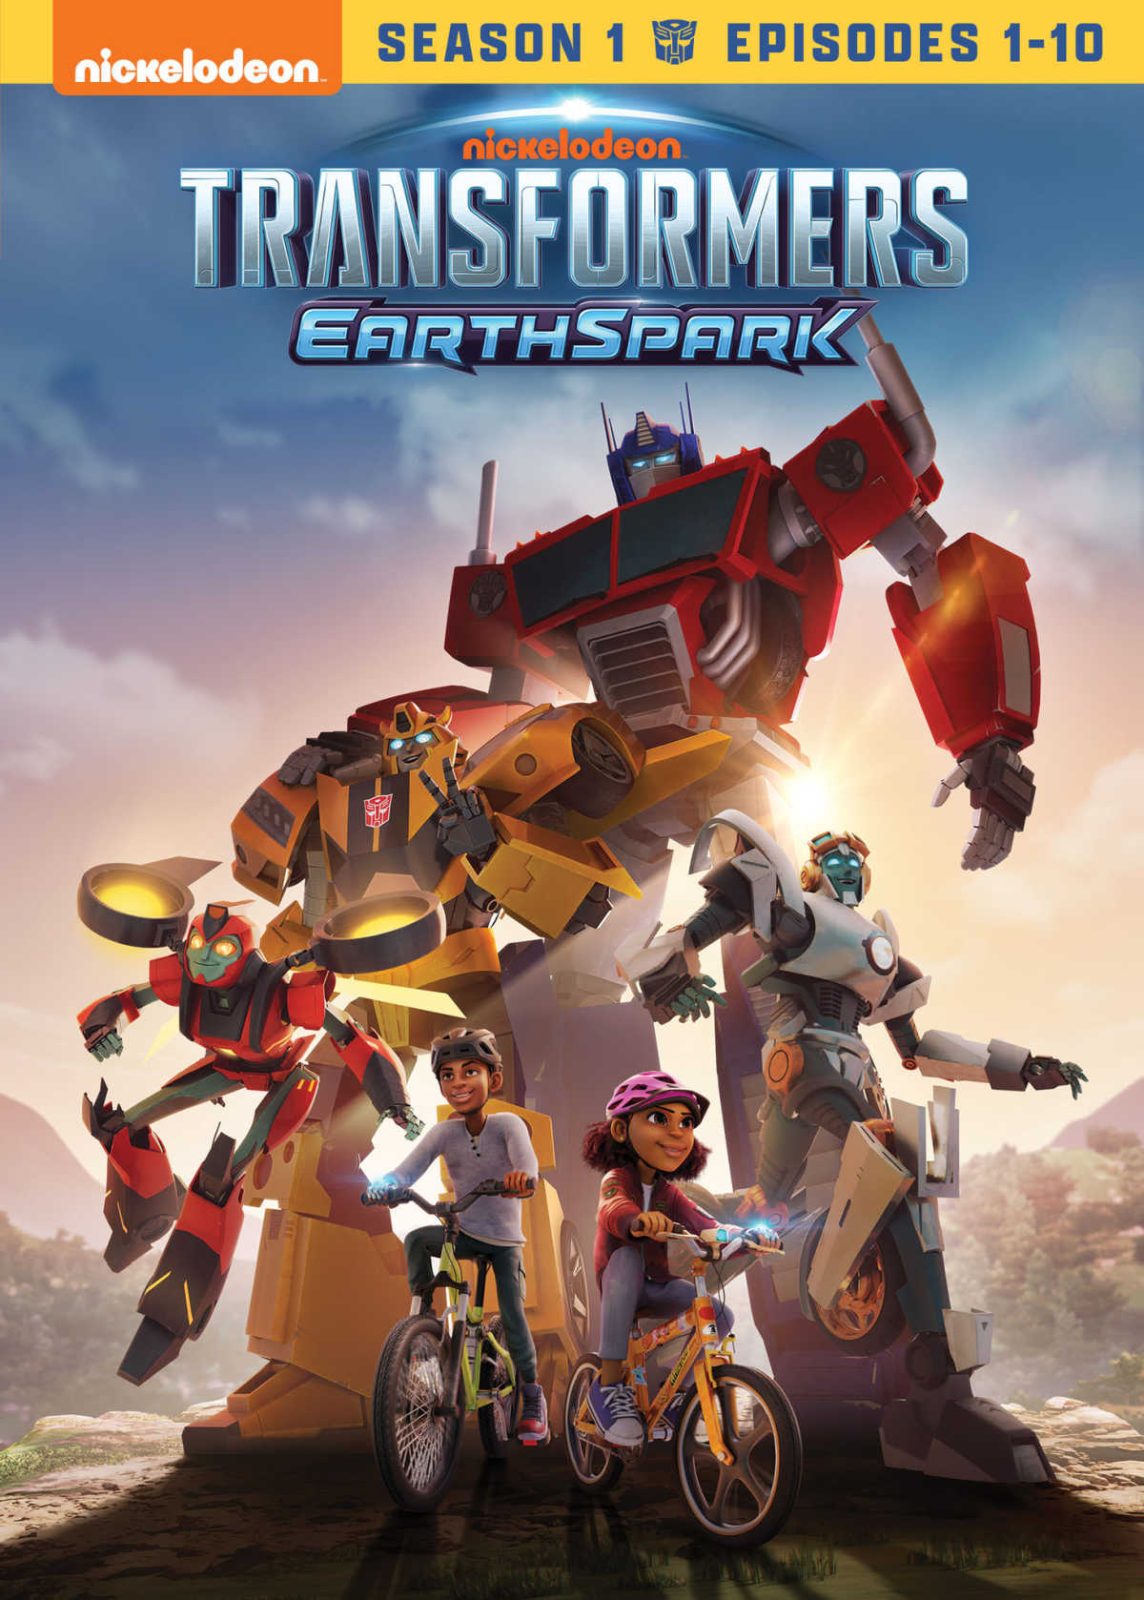 The Transformers EarthSpark two disc DVD set is the perfect gift for any child who loves action, adventure, and robots.